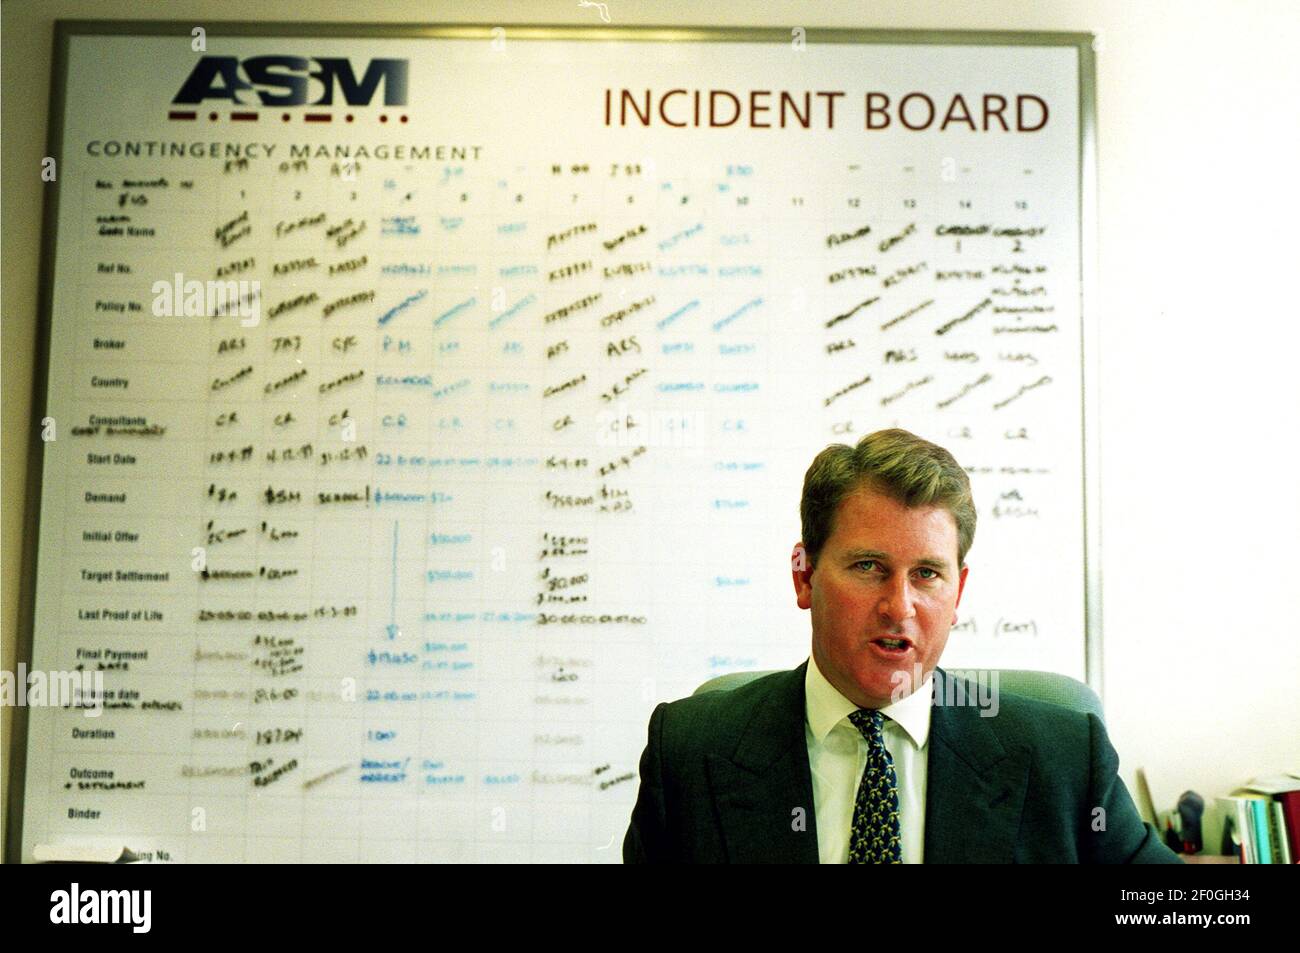 Jeffery Green, chairman of asset security managersPhotograph by John Voos Date: 18/04/01 Stock Photo